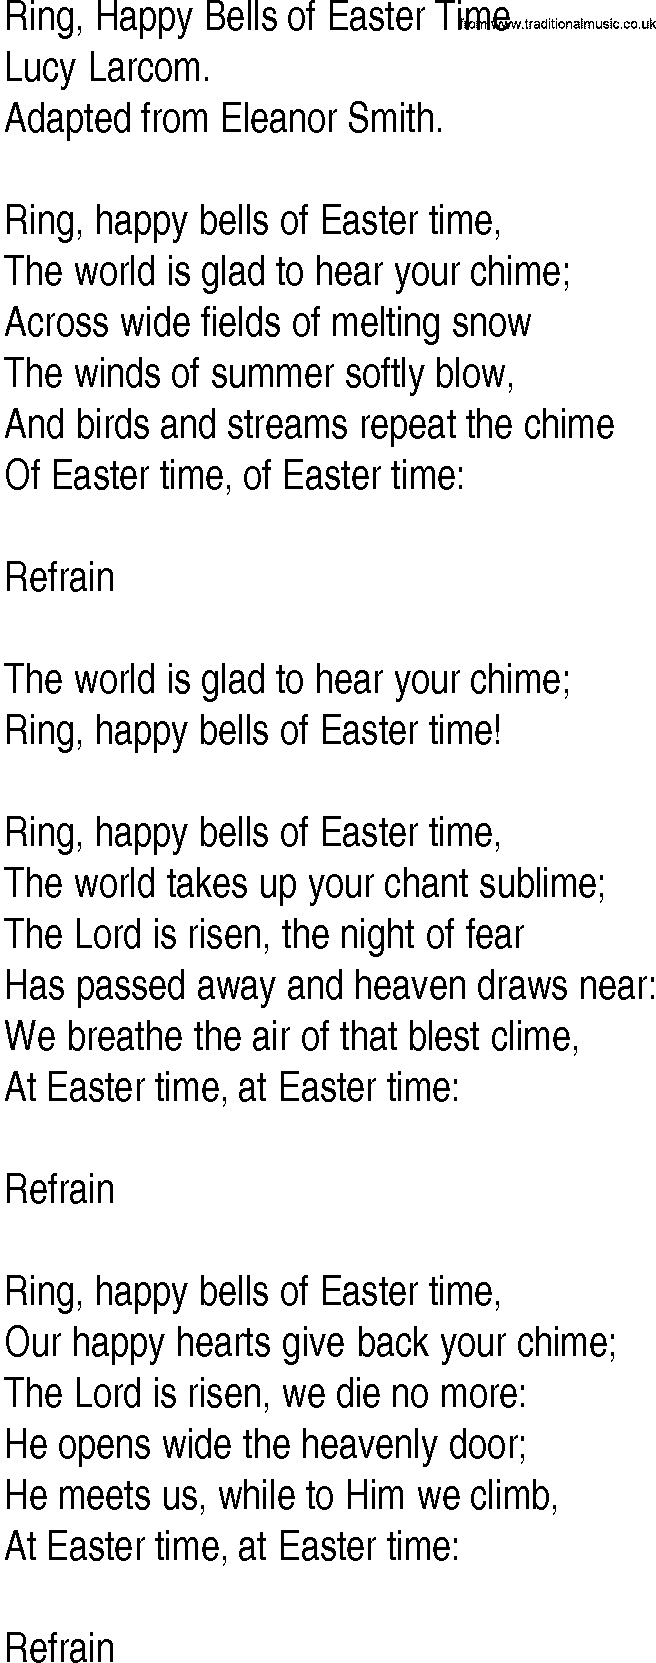 Hymn and Gospel Song: Ring, Happy Bells of Easter Time by Lucy Larcom lyrics